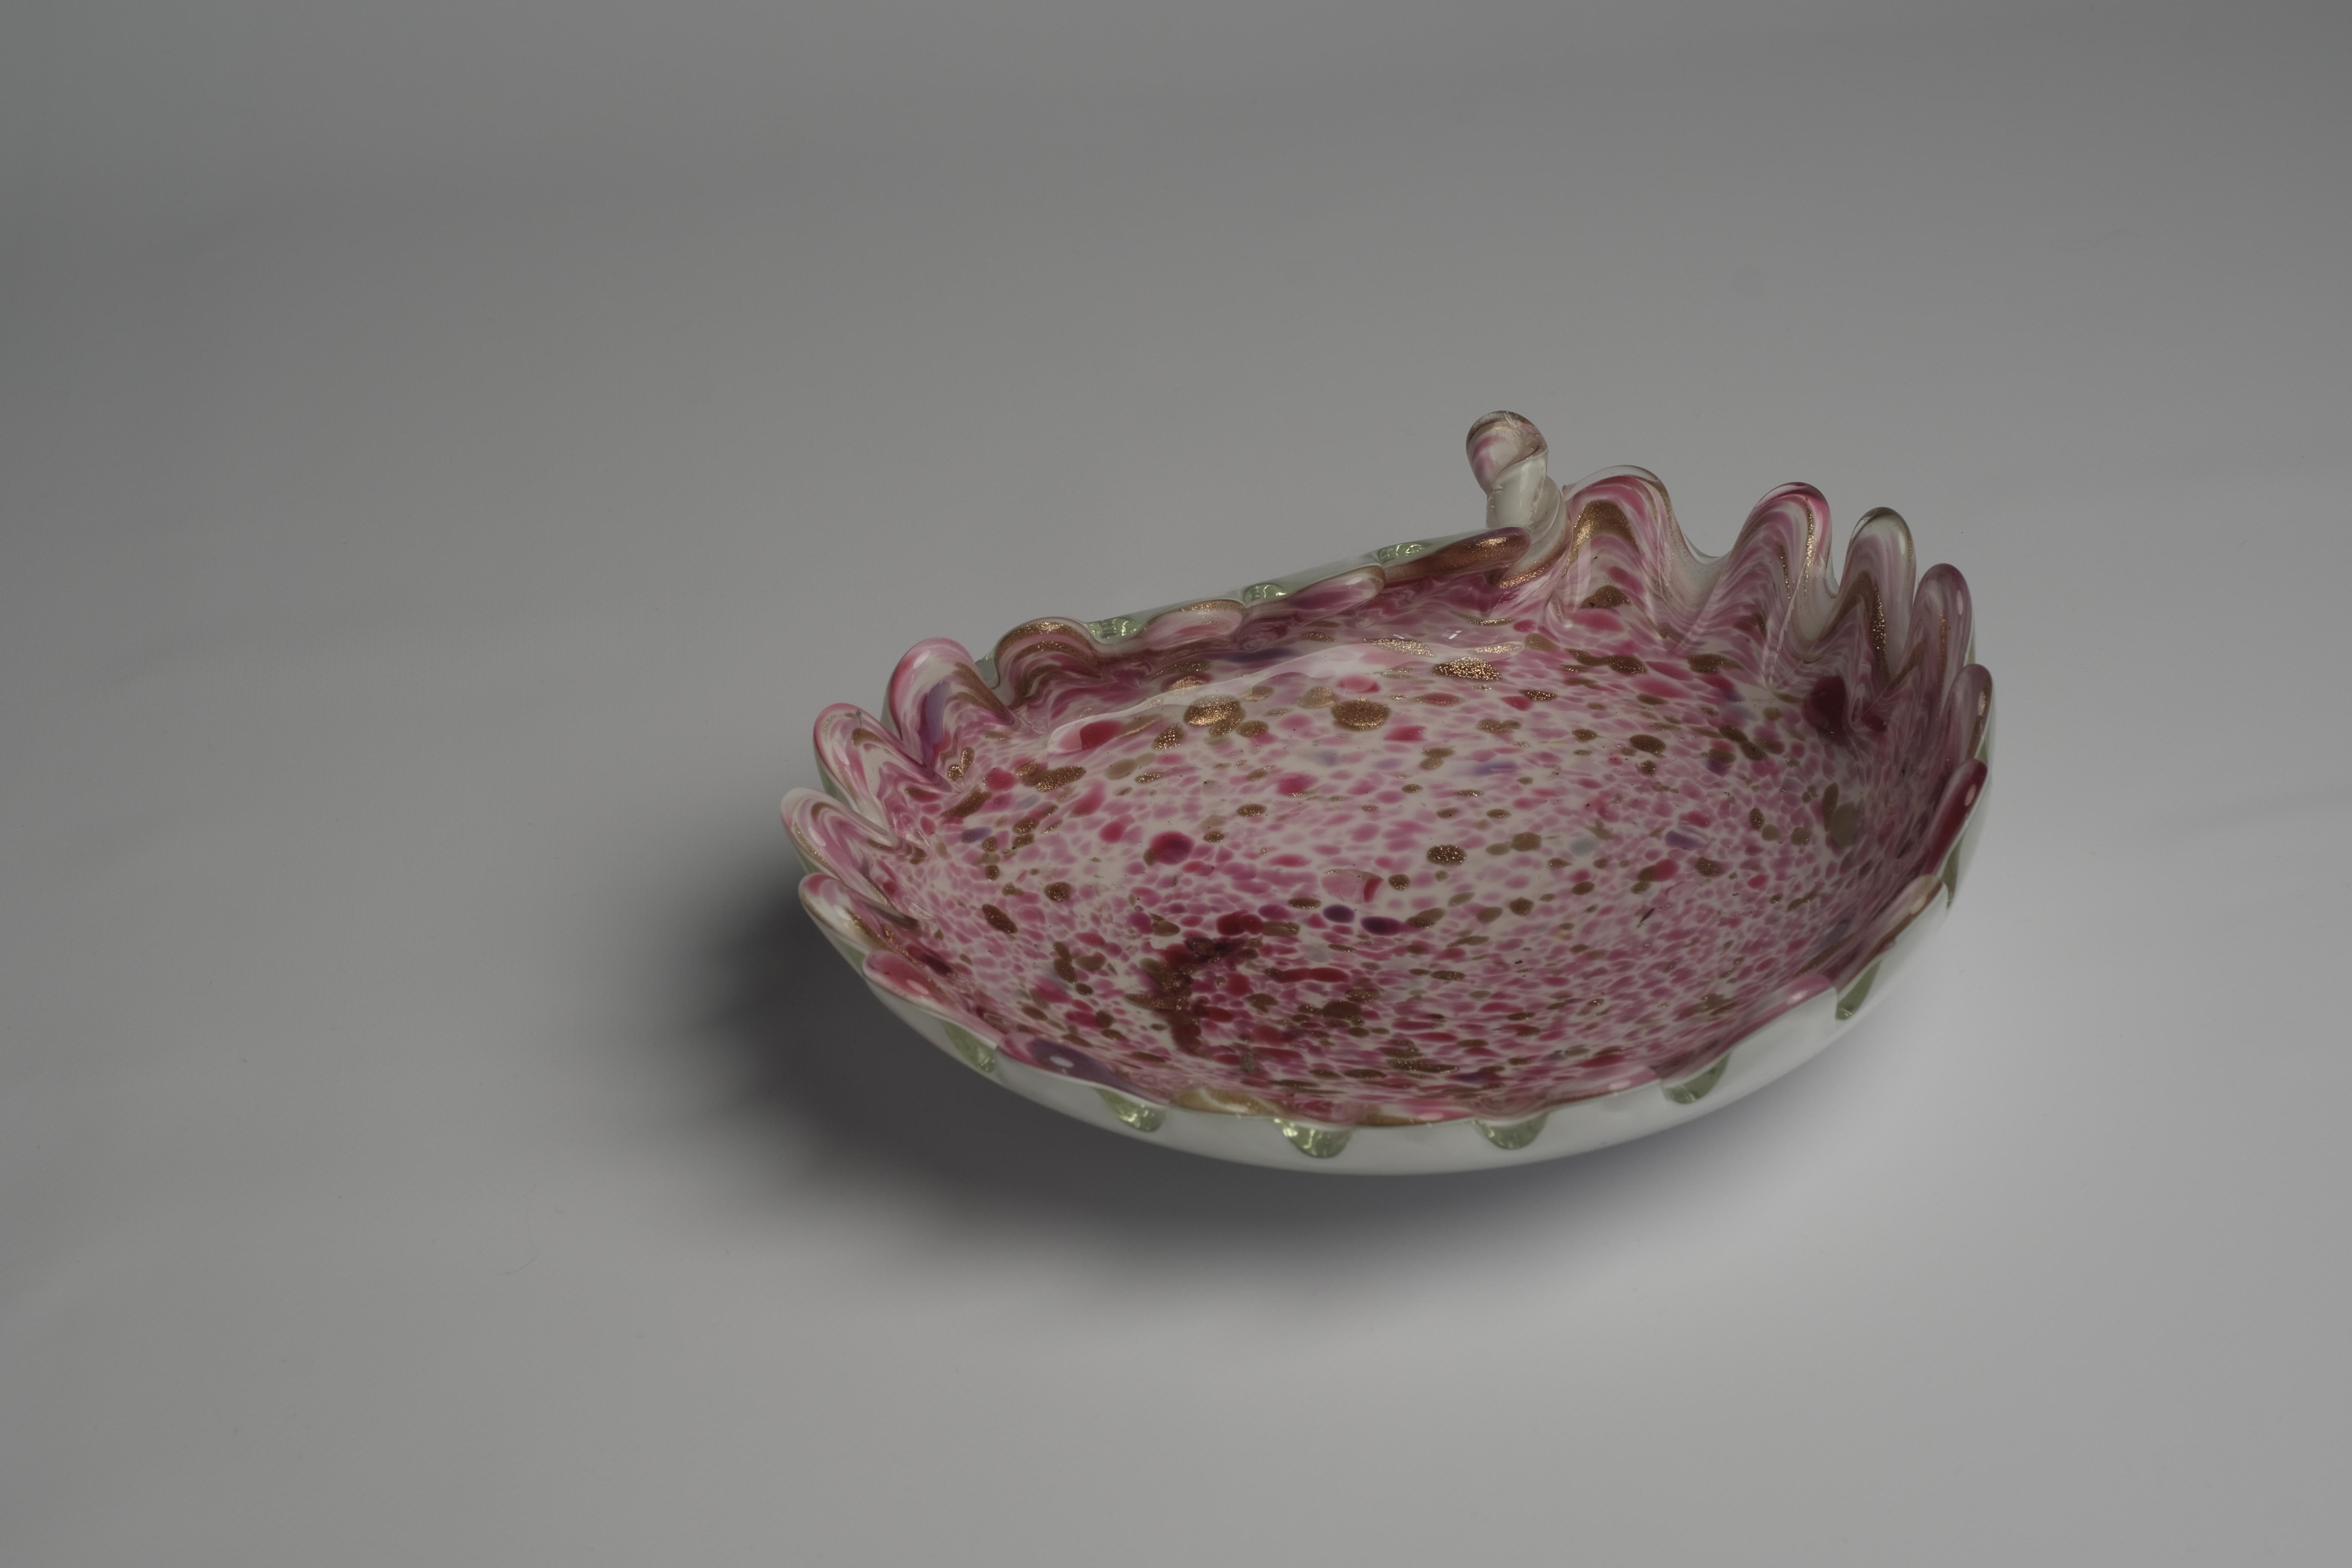 Beautiful low Murano serving bowl made in Italy in the 1960s. Soft pink and purple hues, with splashes of gold-flake inlays, all in the organic shape of an open mussle alternatively meat-eating-plant.